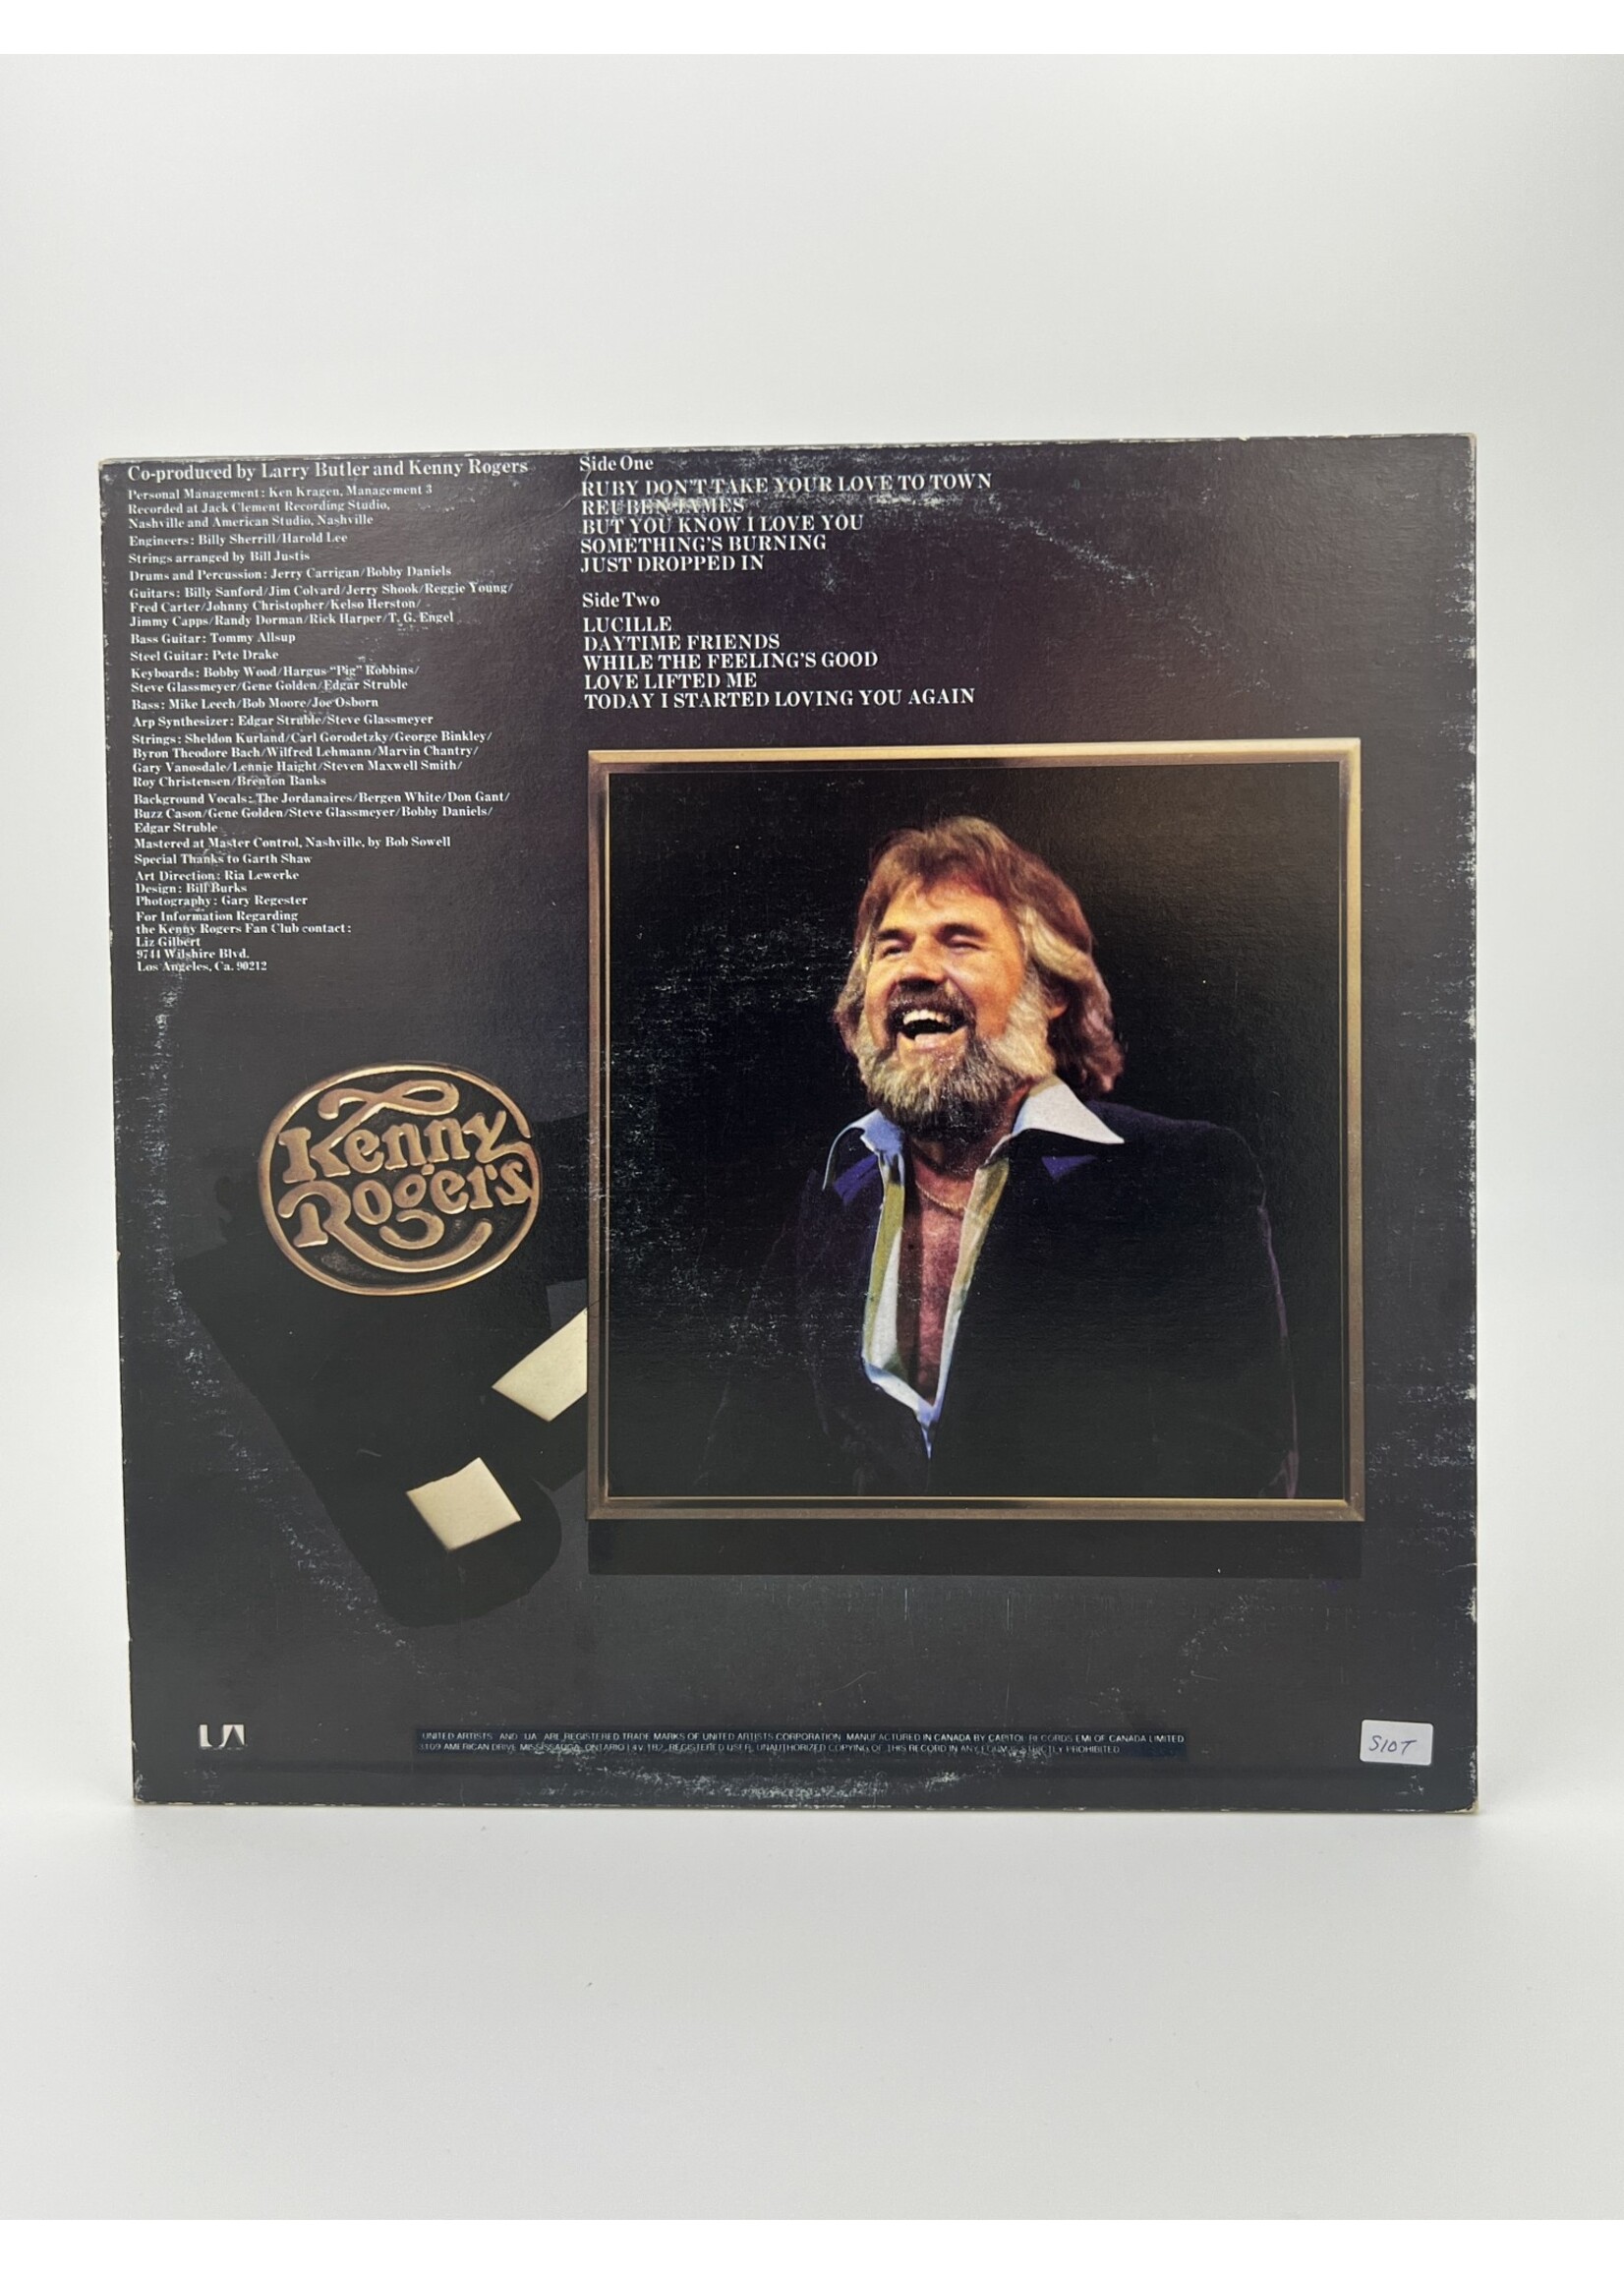 LP Kenny Rogers 10 Years Of Gold LP Record